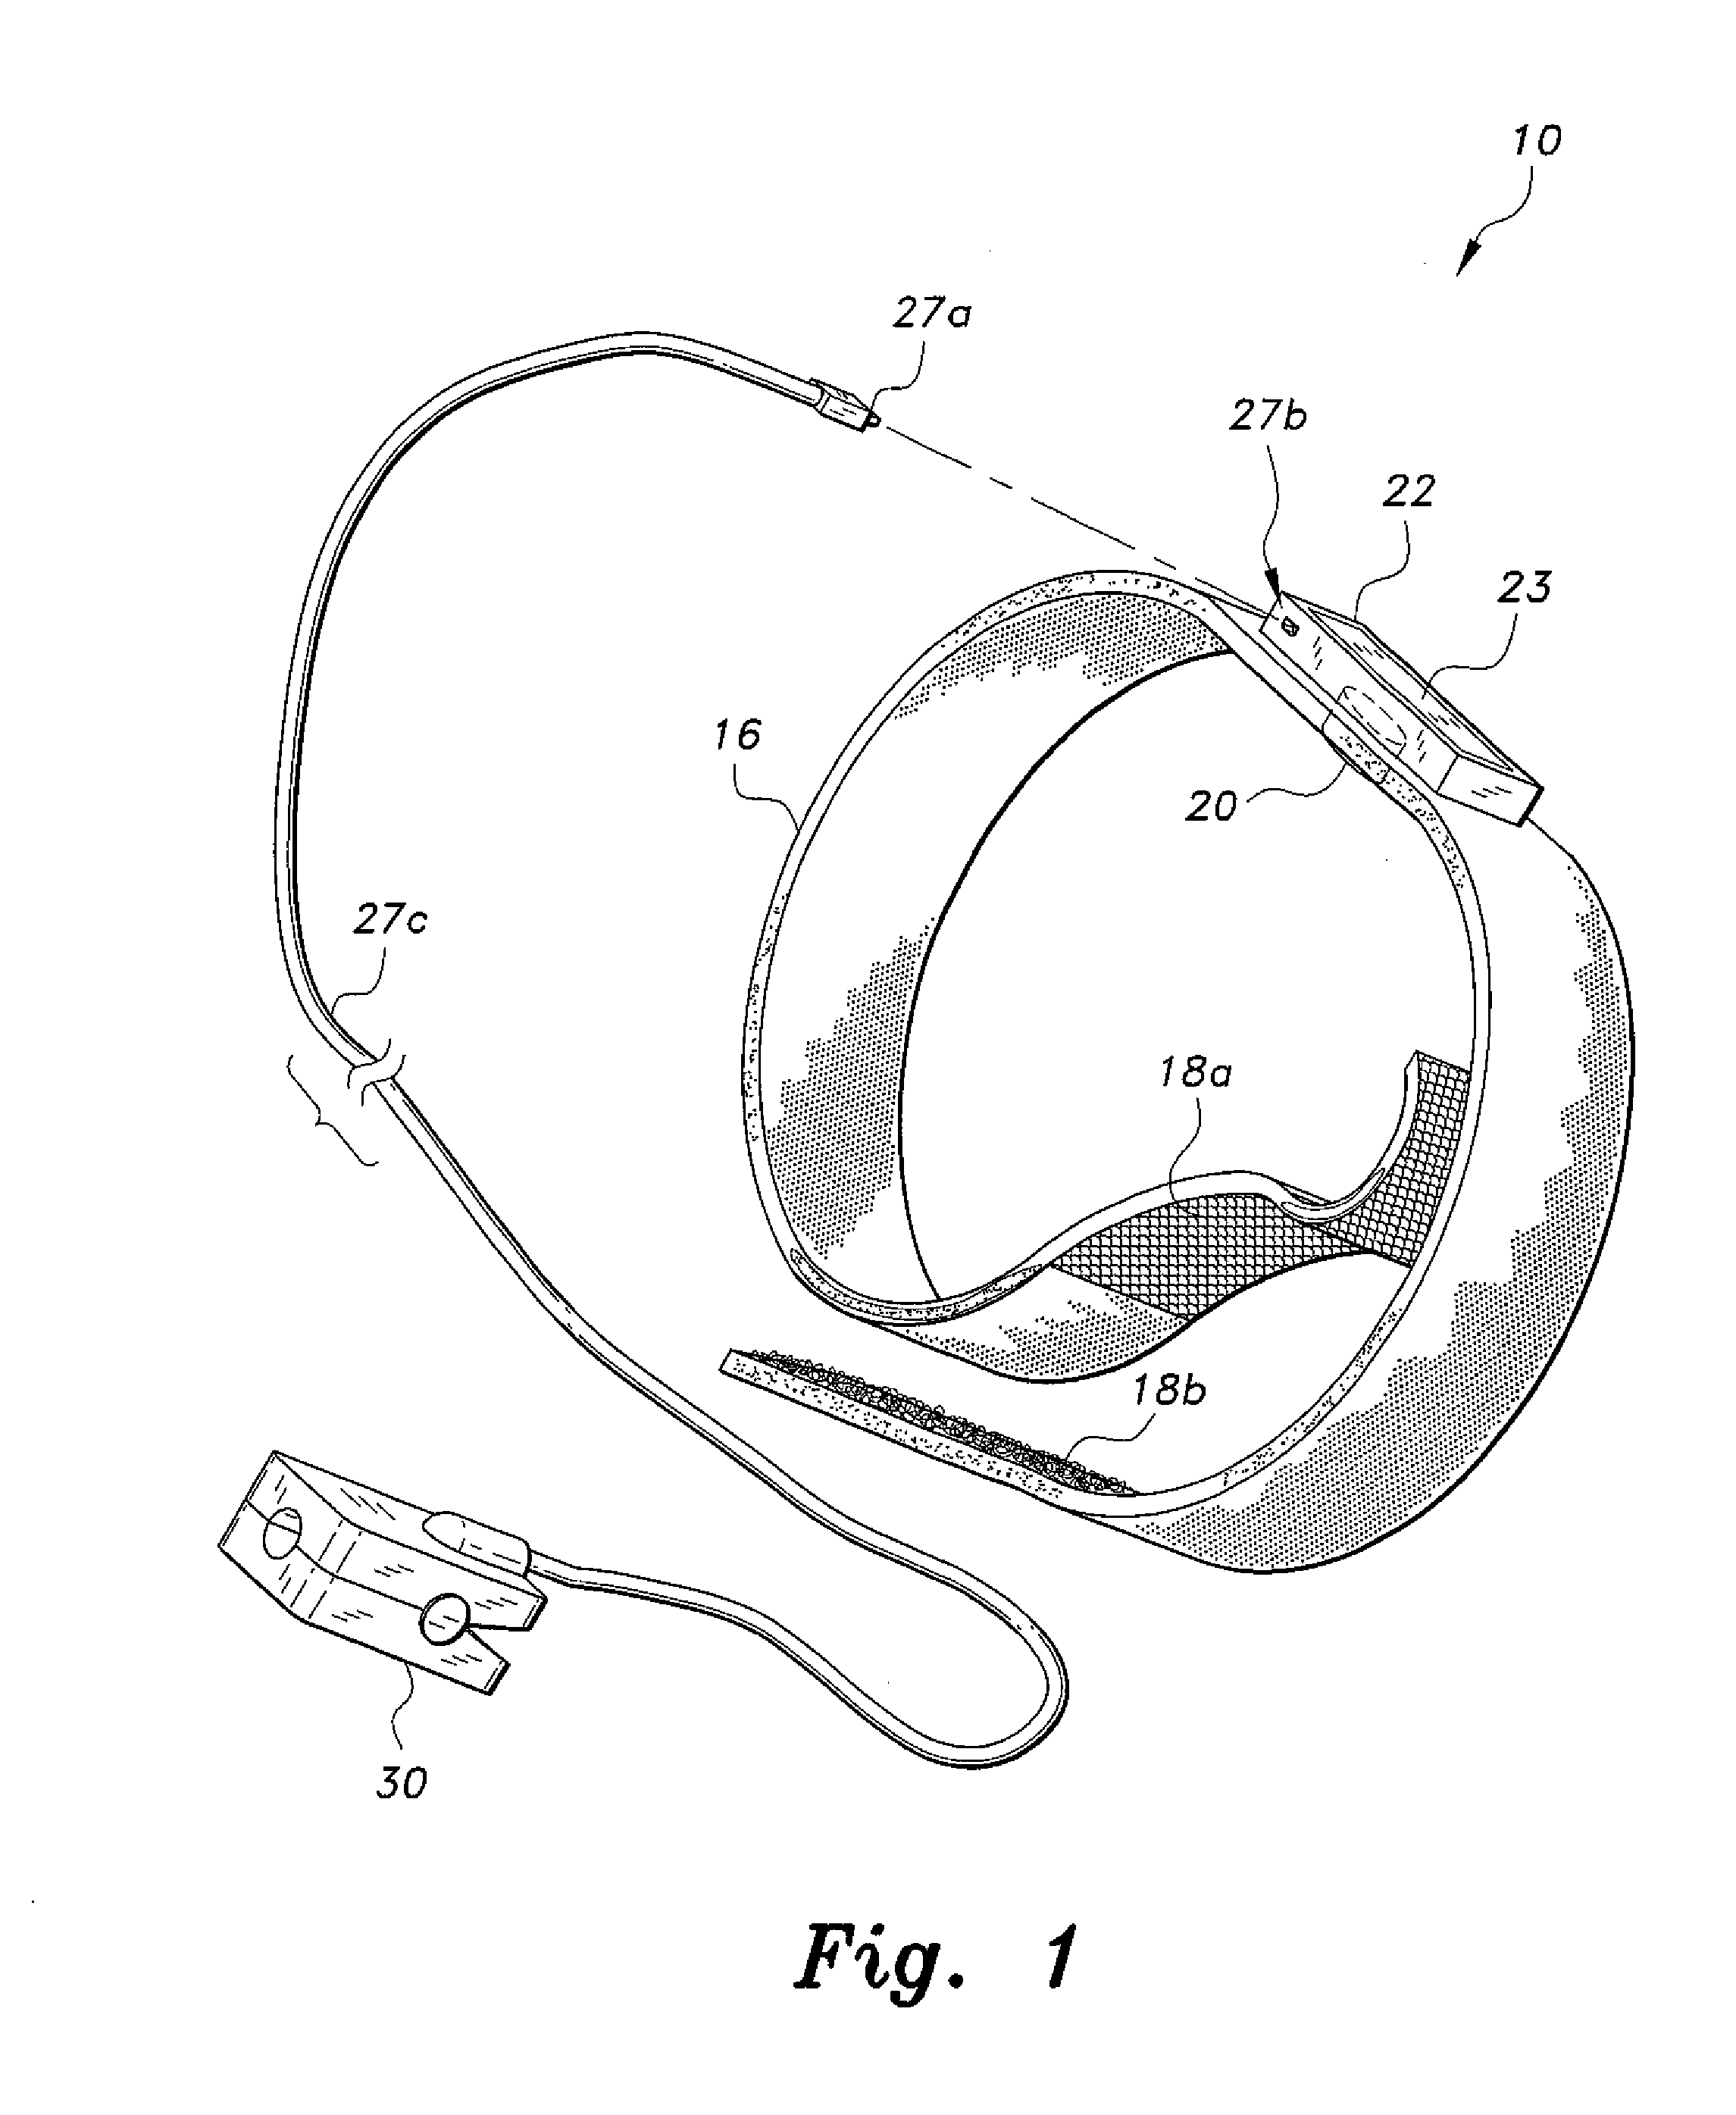 Wearable acoustic device for monitoring breathing sounds